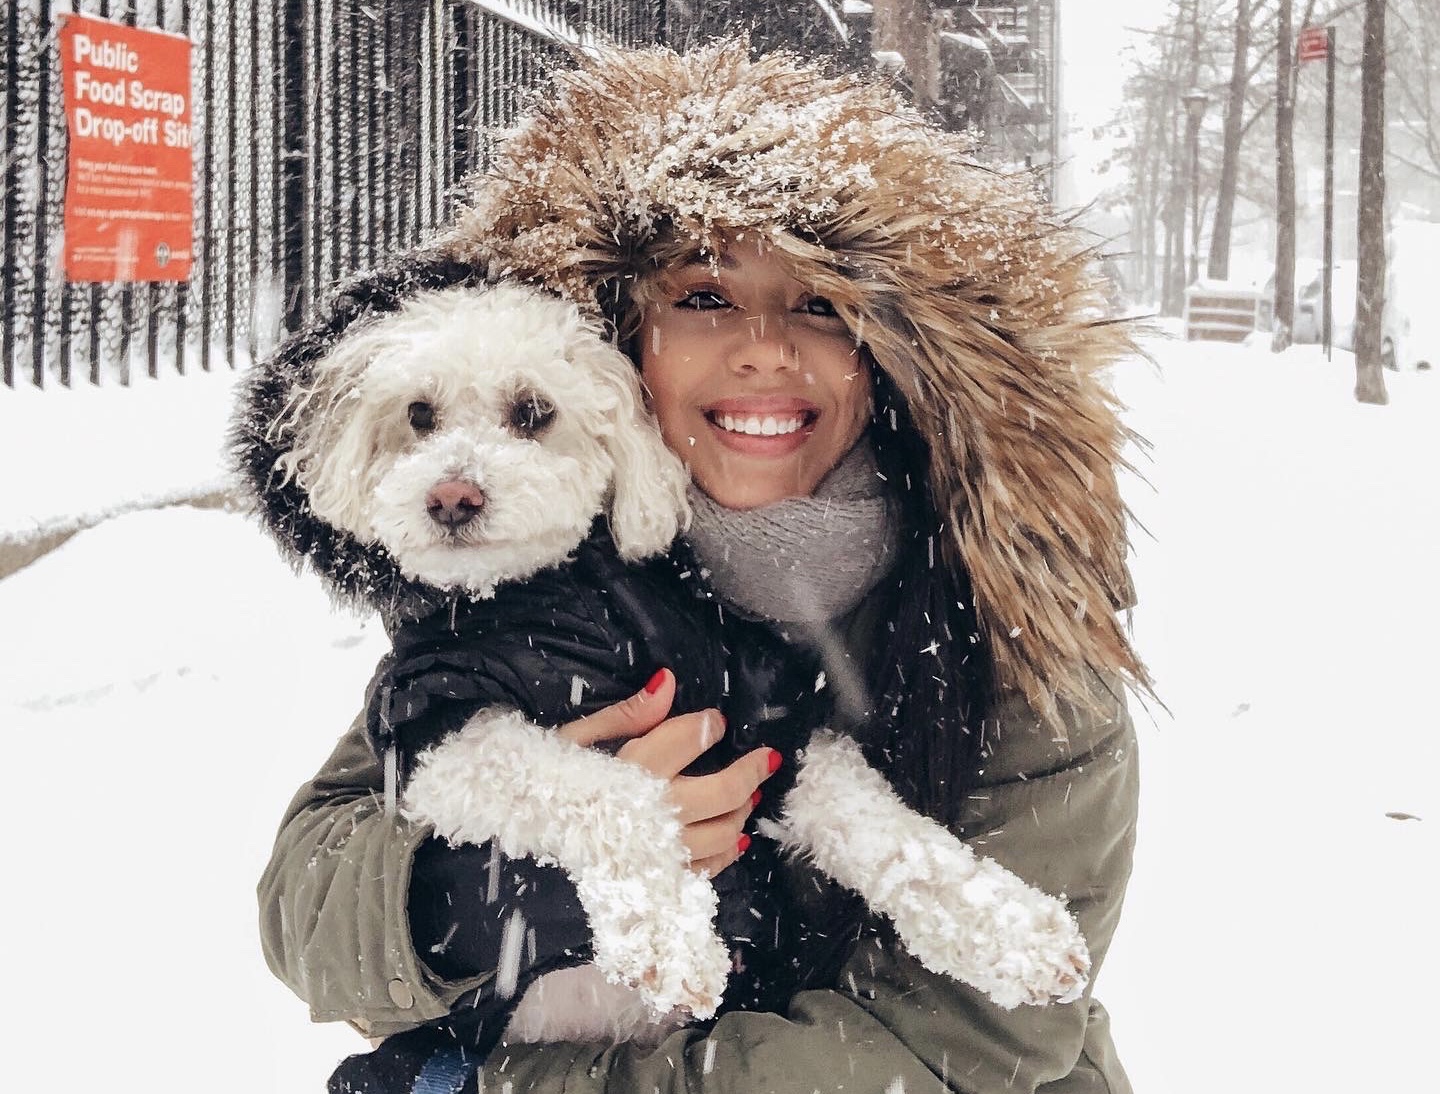 Naty with her dog, Kiko, in the snow in Hell's Kitchen.